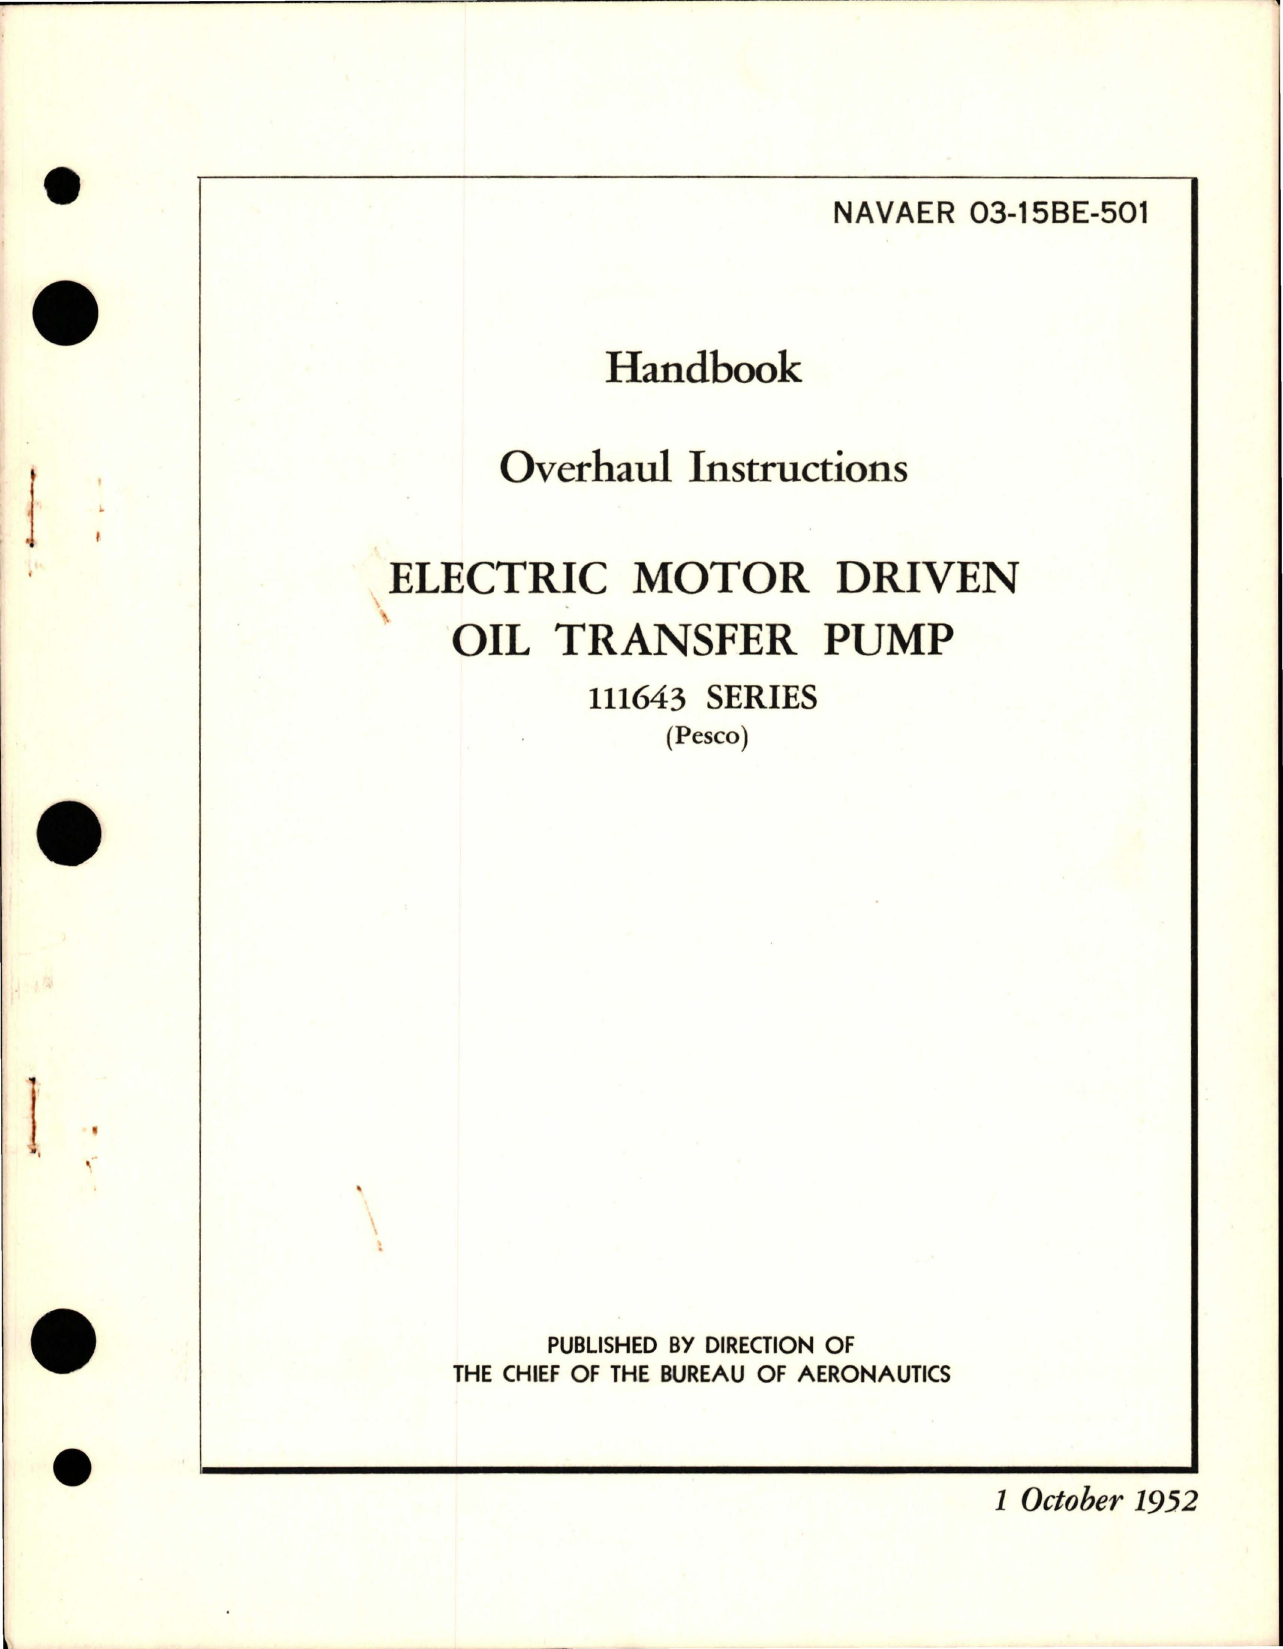 Sample page 1 from AirCorps Library document: Overhaul Instructions for Electric Motor Driven Oil Transfer Pump - 111643 Series